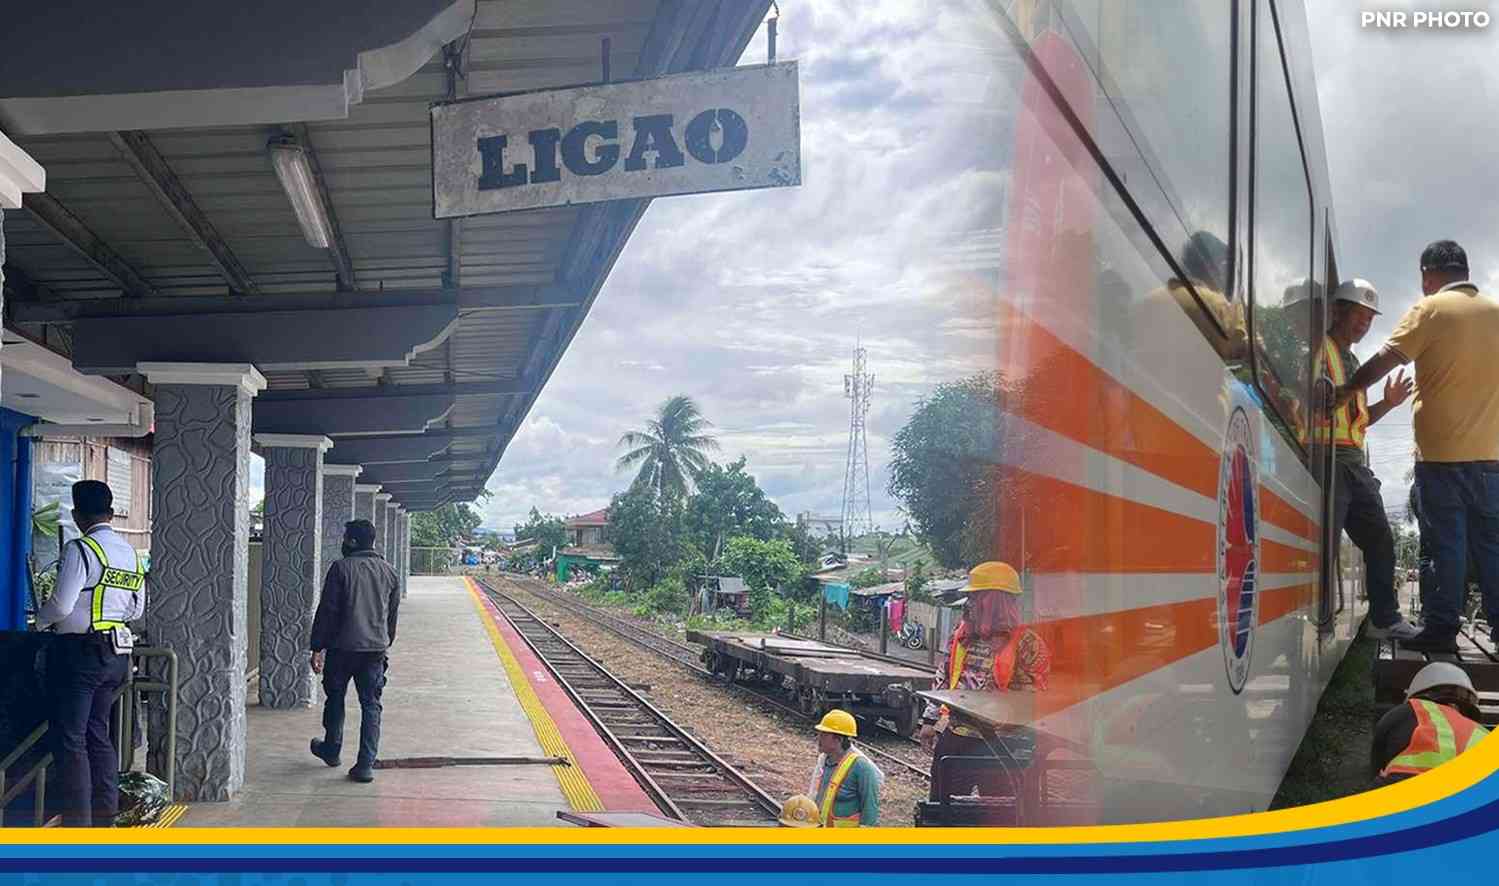 PNR to open Naga-Ligao route this July 31